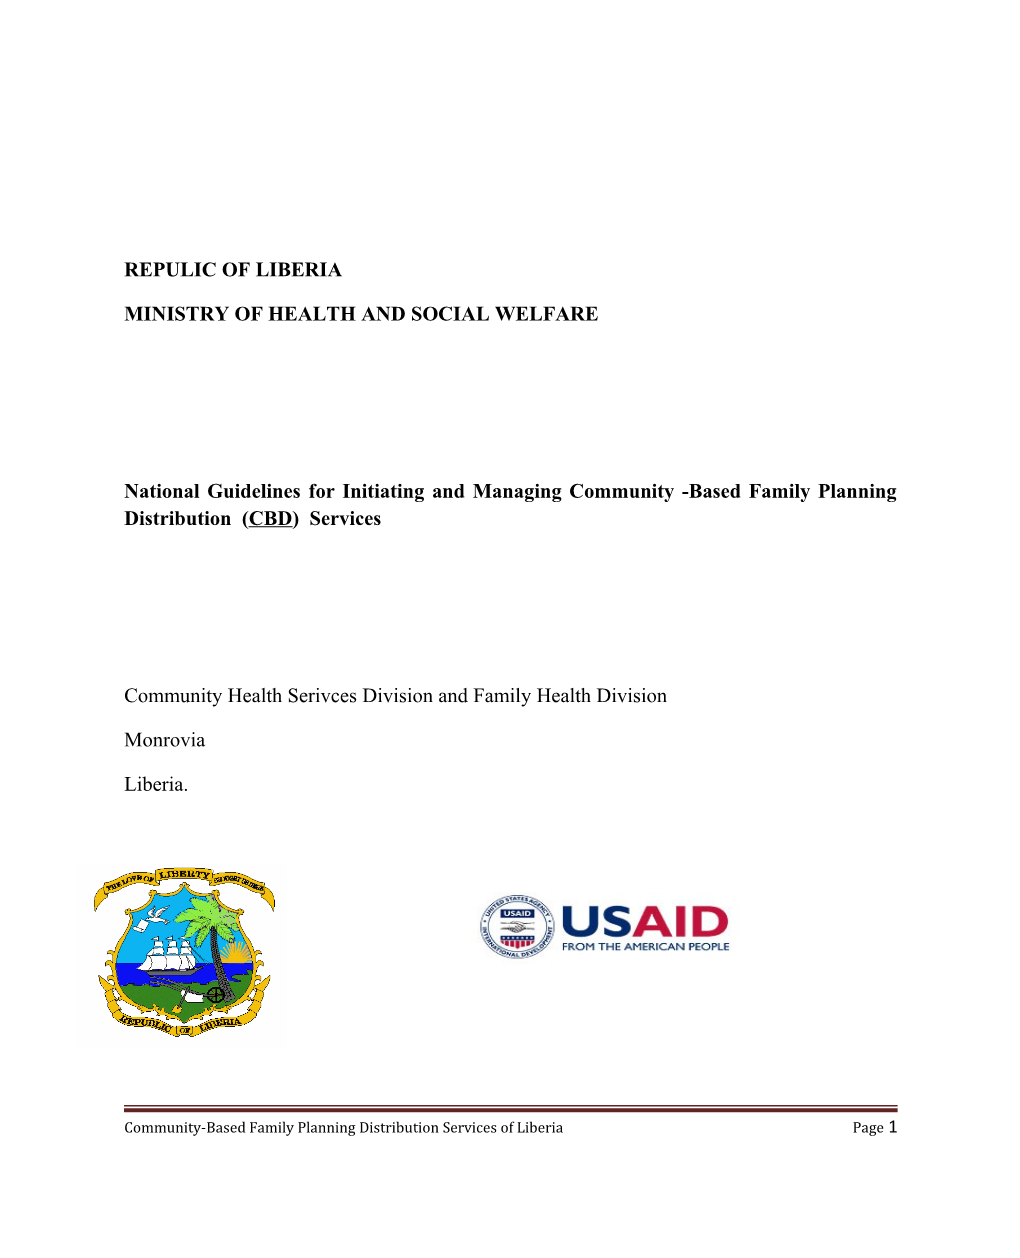 National Guidelines For Initiating And Managing Community-Based Family Planning Distribution (CBD) Services